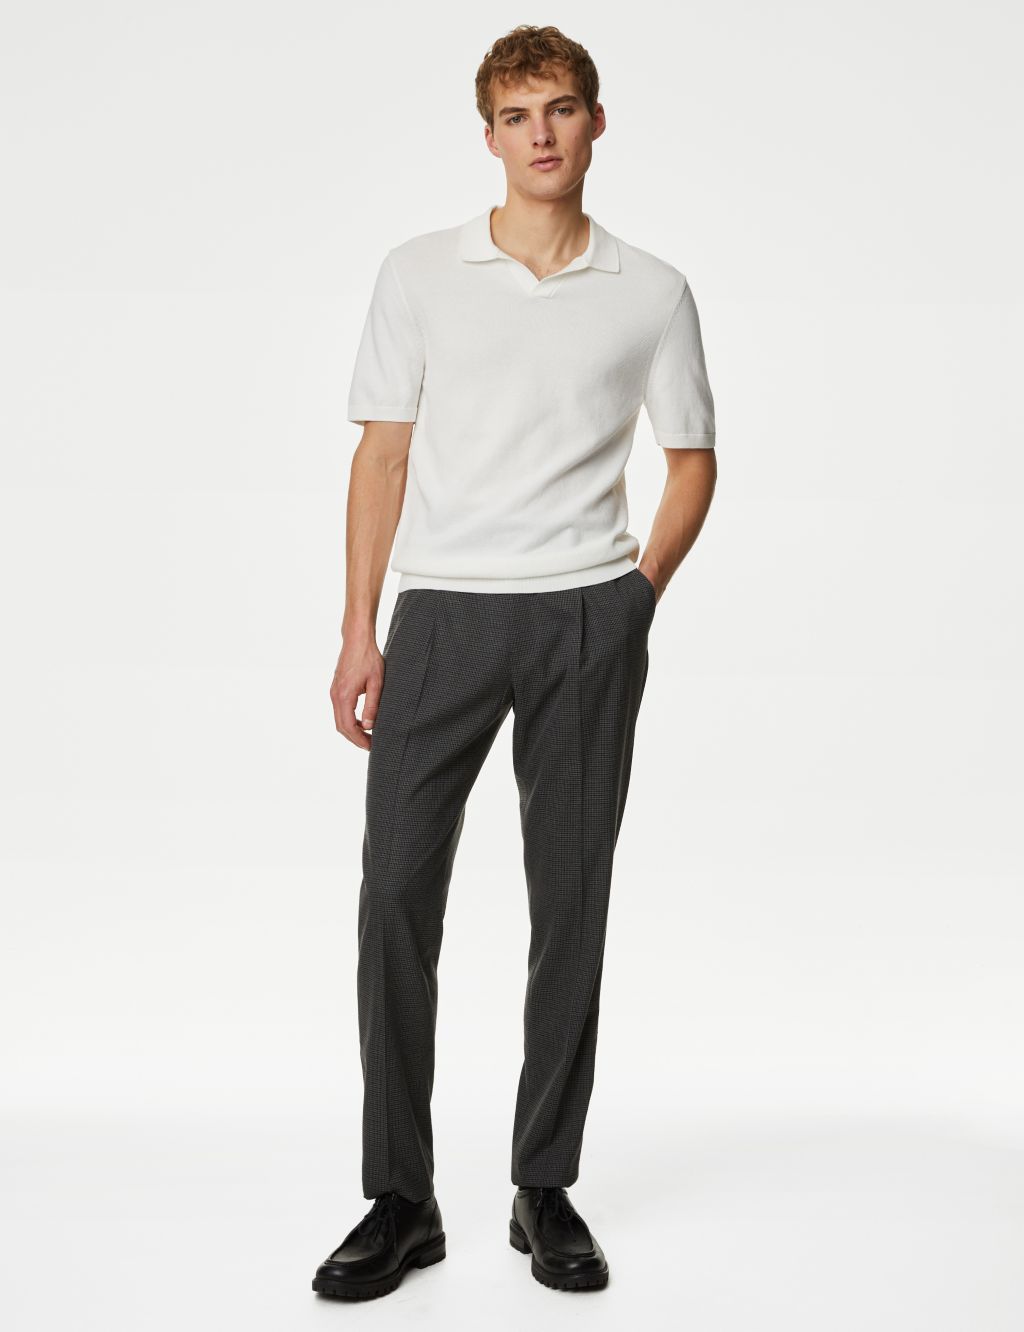 Textured Checked Stretch Trousers image 1